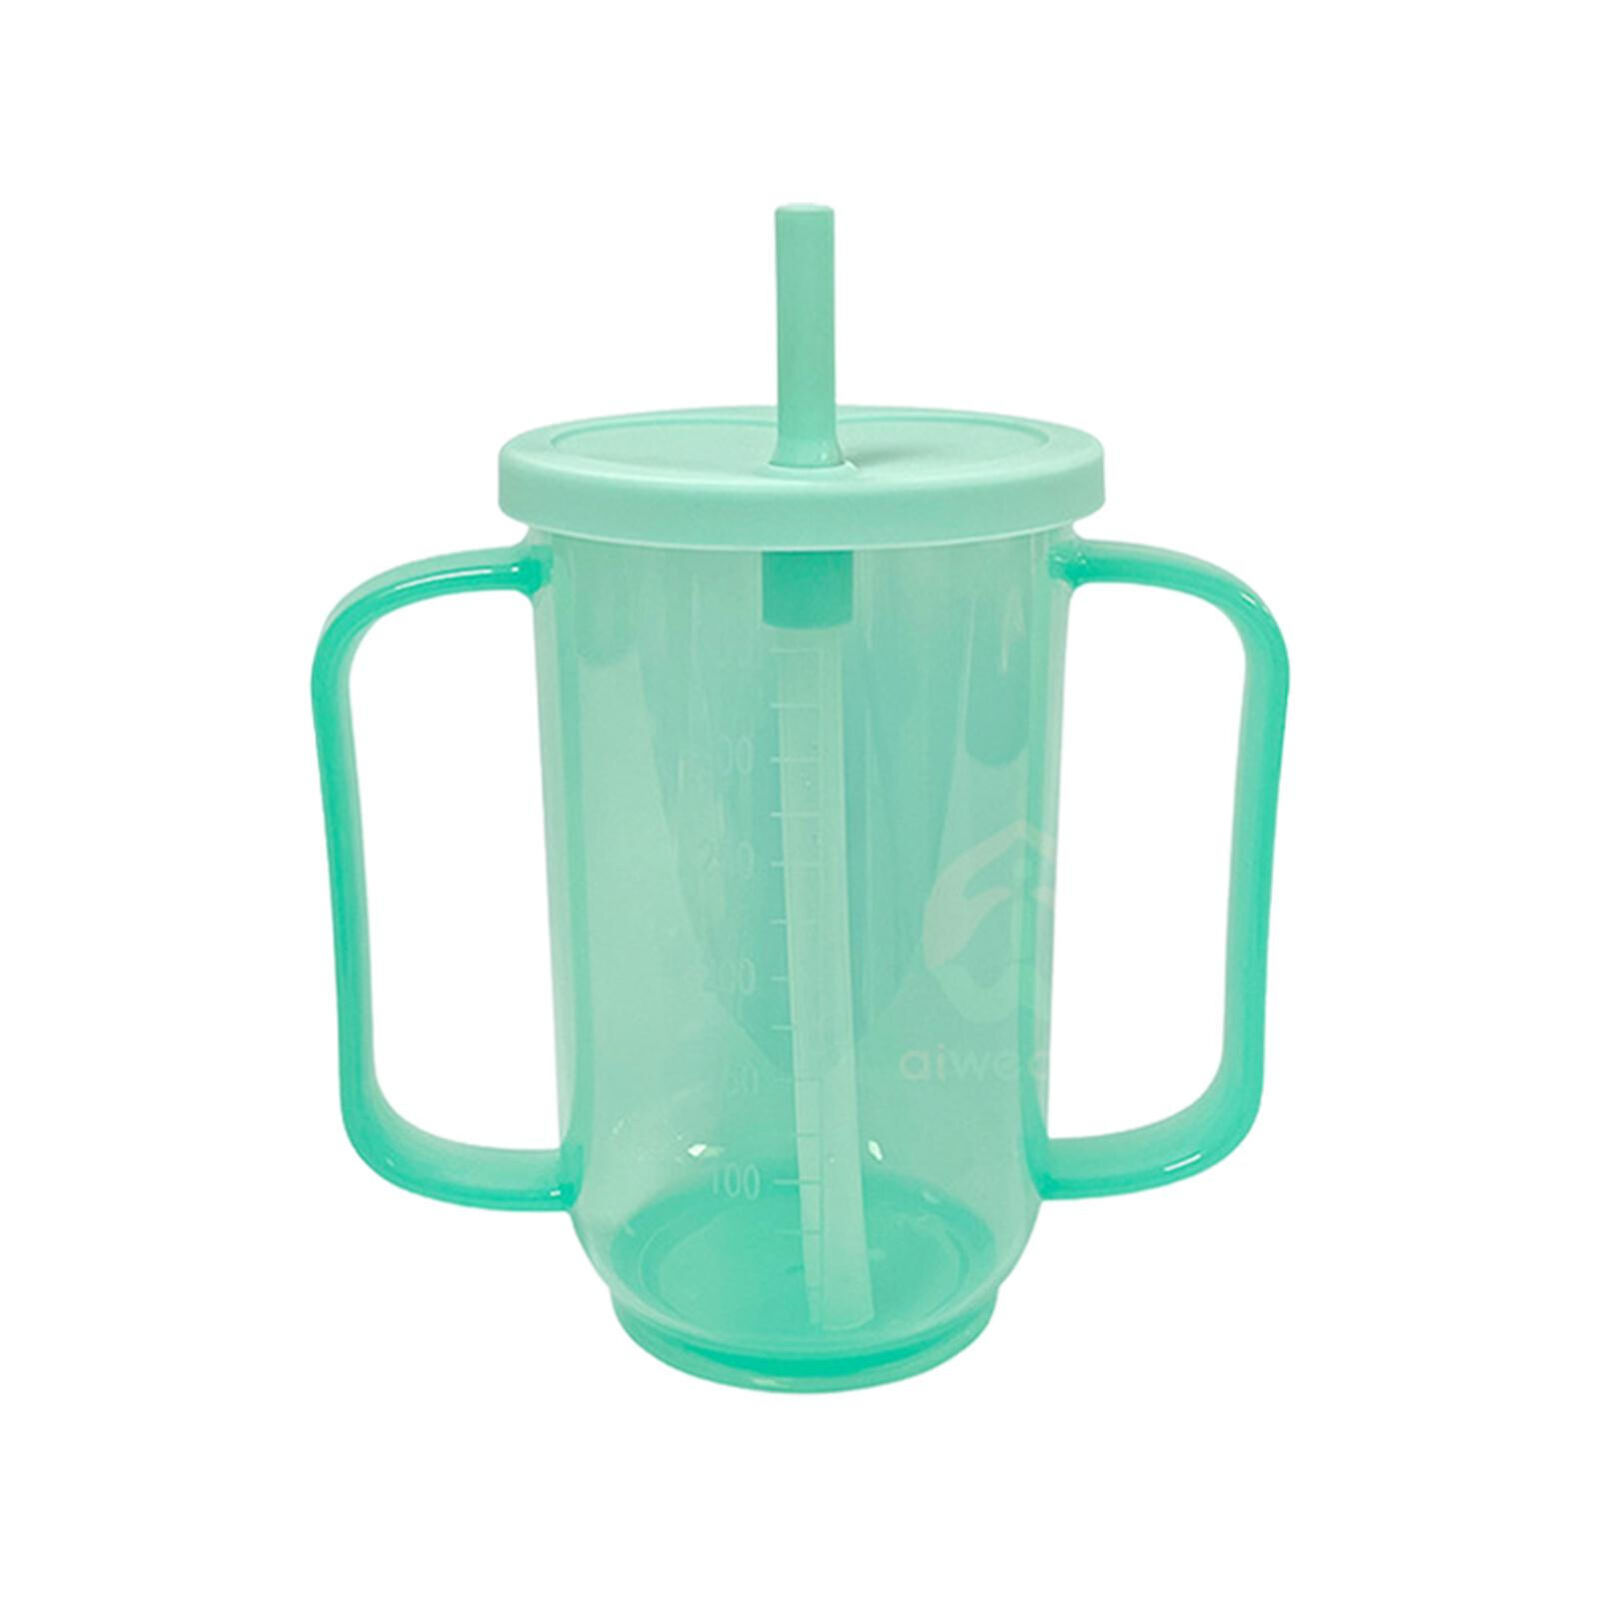 Adult Spill-proof Cups, Bedridden Patients With Liquid Straw Cups, And Postpartu